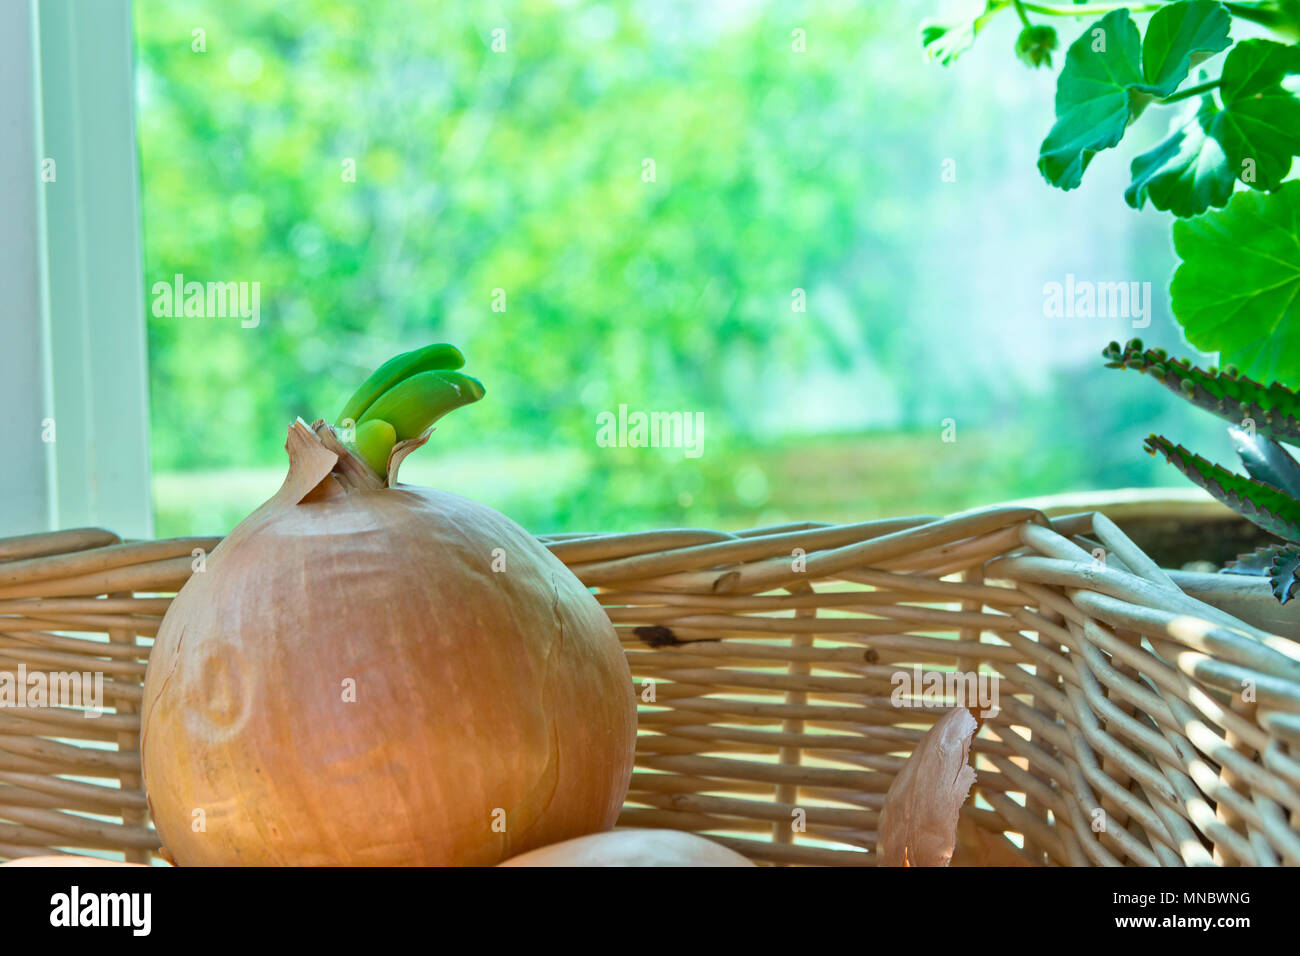 Yellow Sprouted Onion Bulbs in Wicker Basket on Window Sill. House Plants. Spring Summer Morning with Soft Sunlight. Cozy Rural Kitchen Interior. Auth Stock Photo